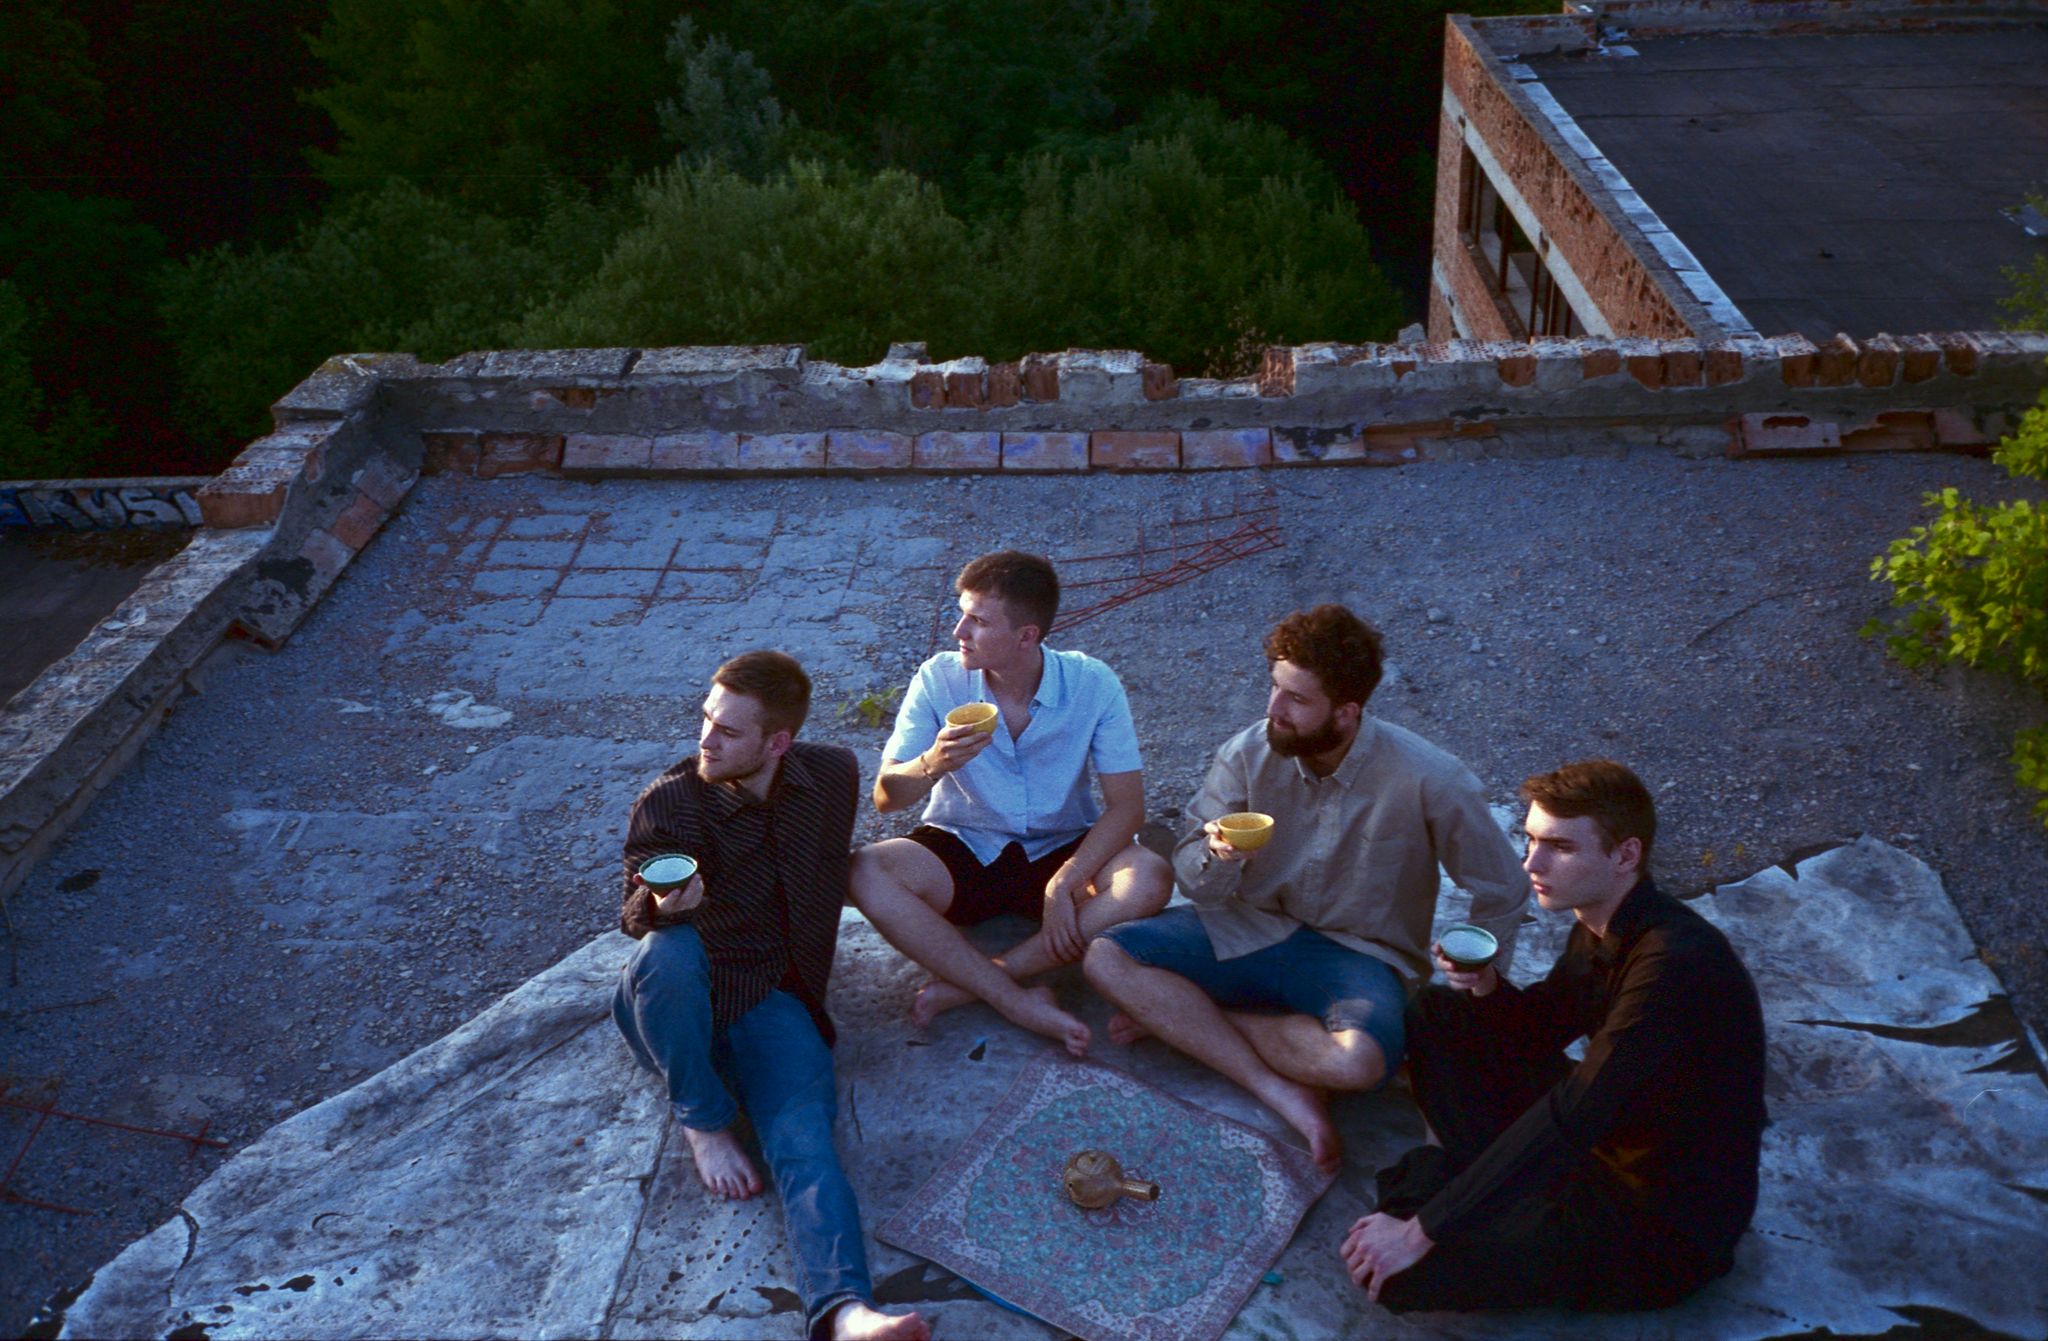 Four boys enjoying a tea together on a rooftop sunset